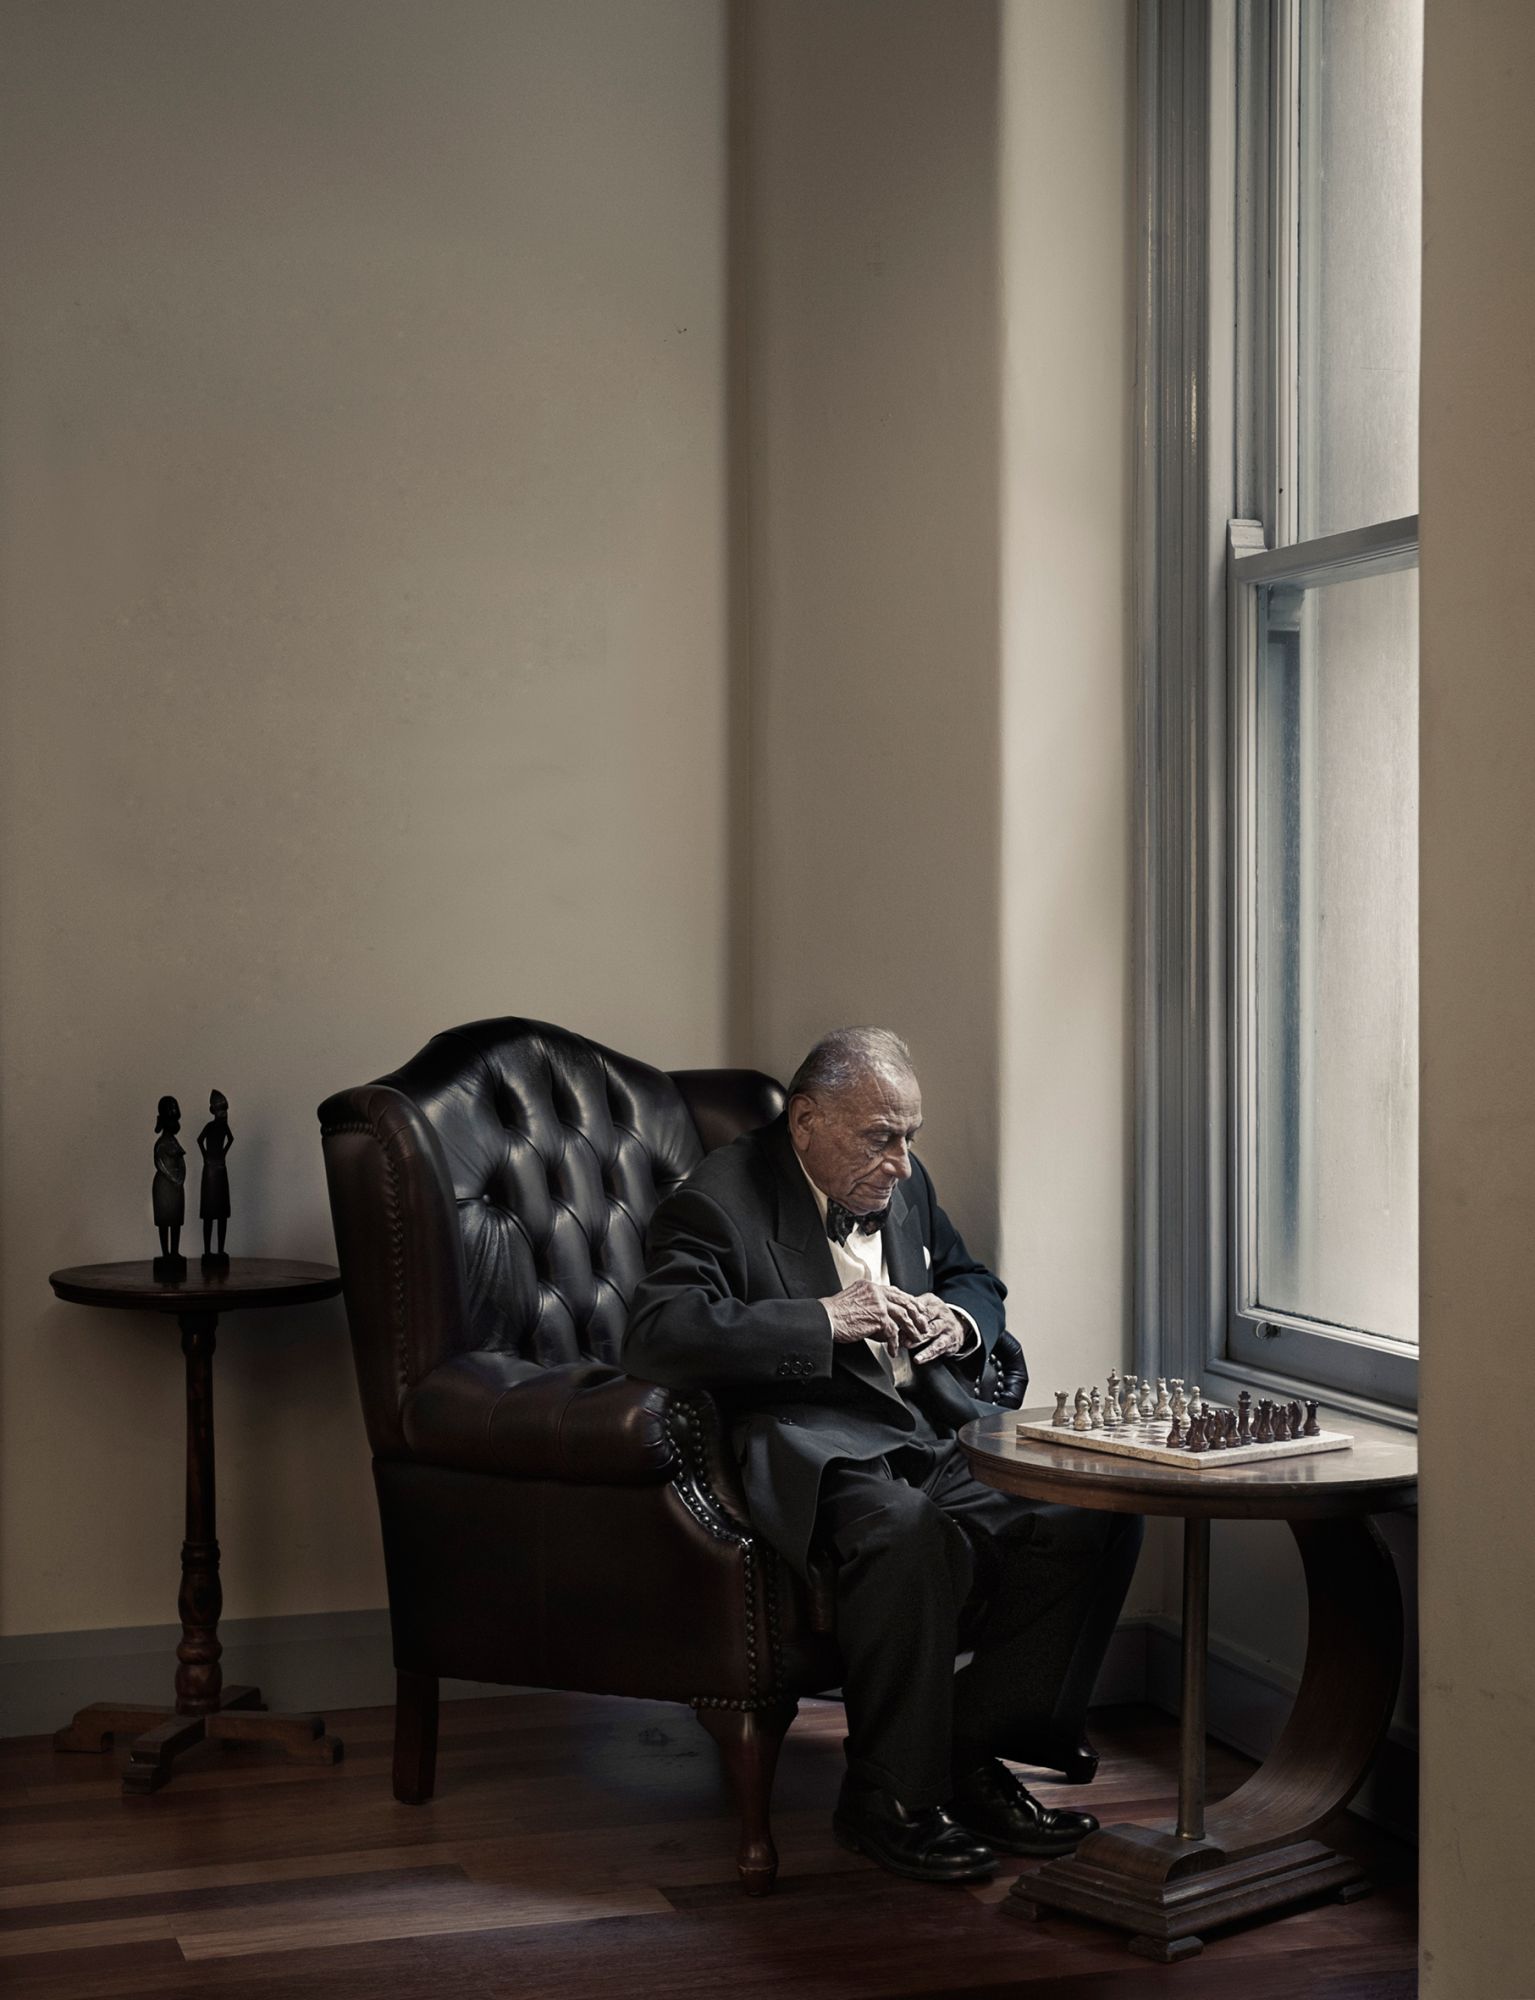 The Chess Player, 2011 by Andrew Campbell